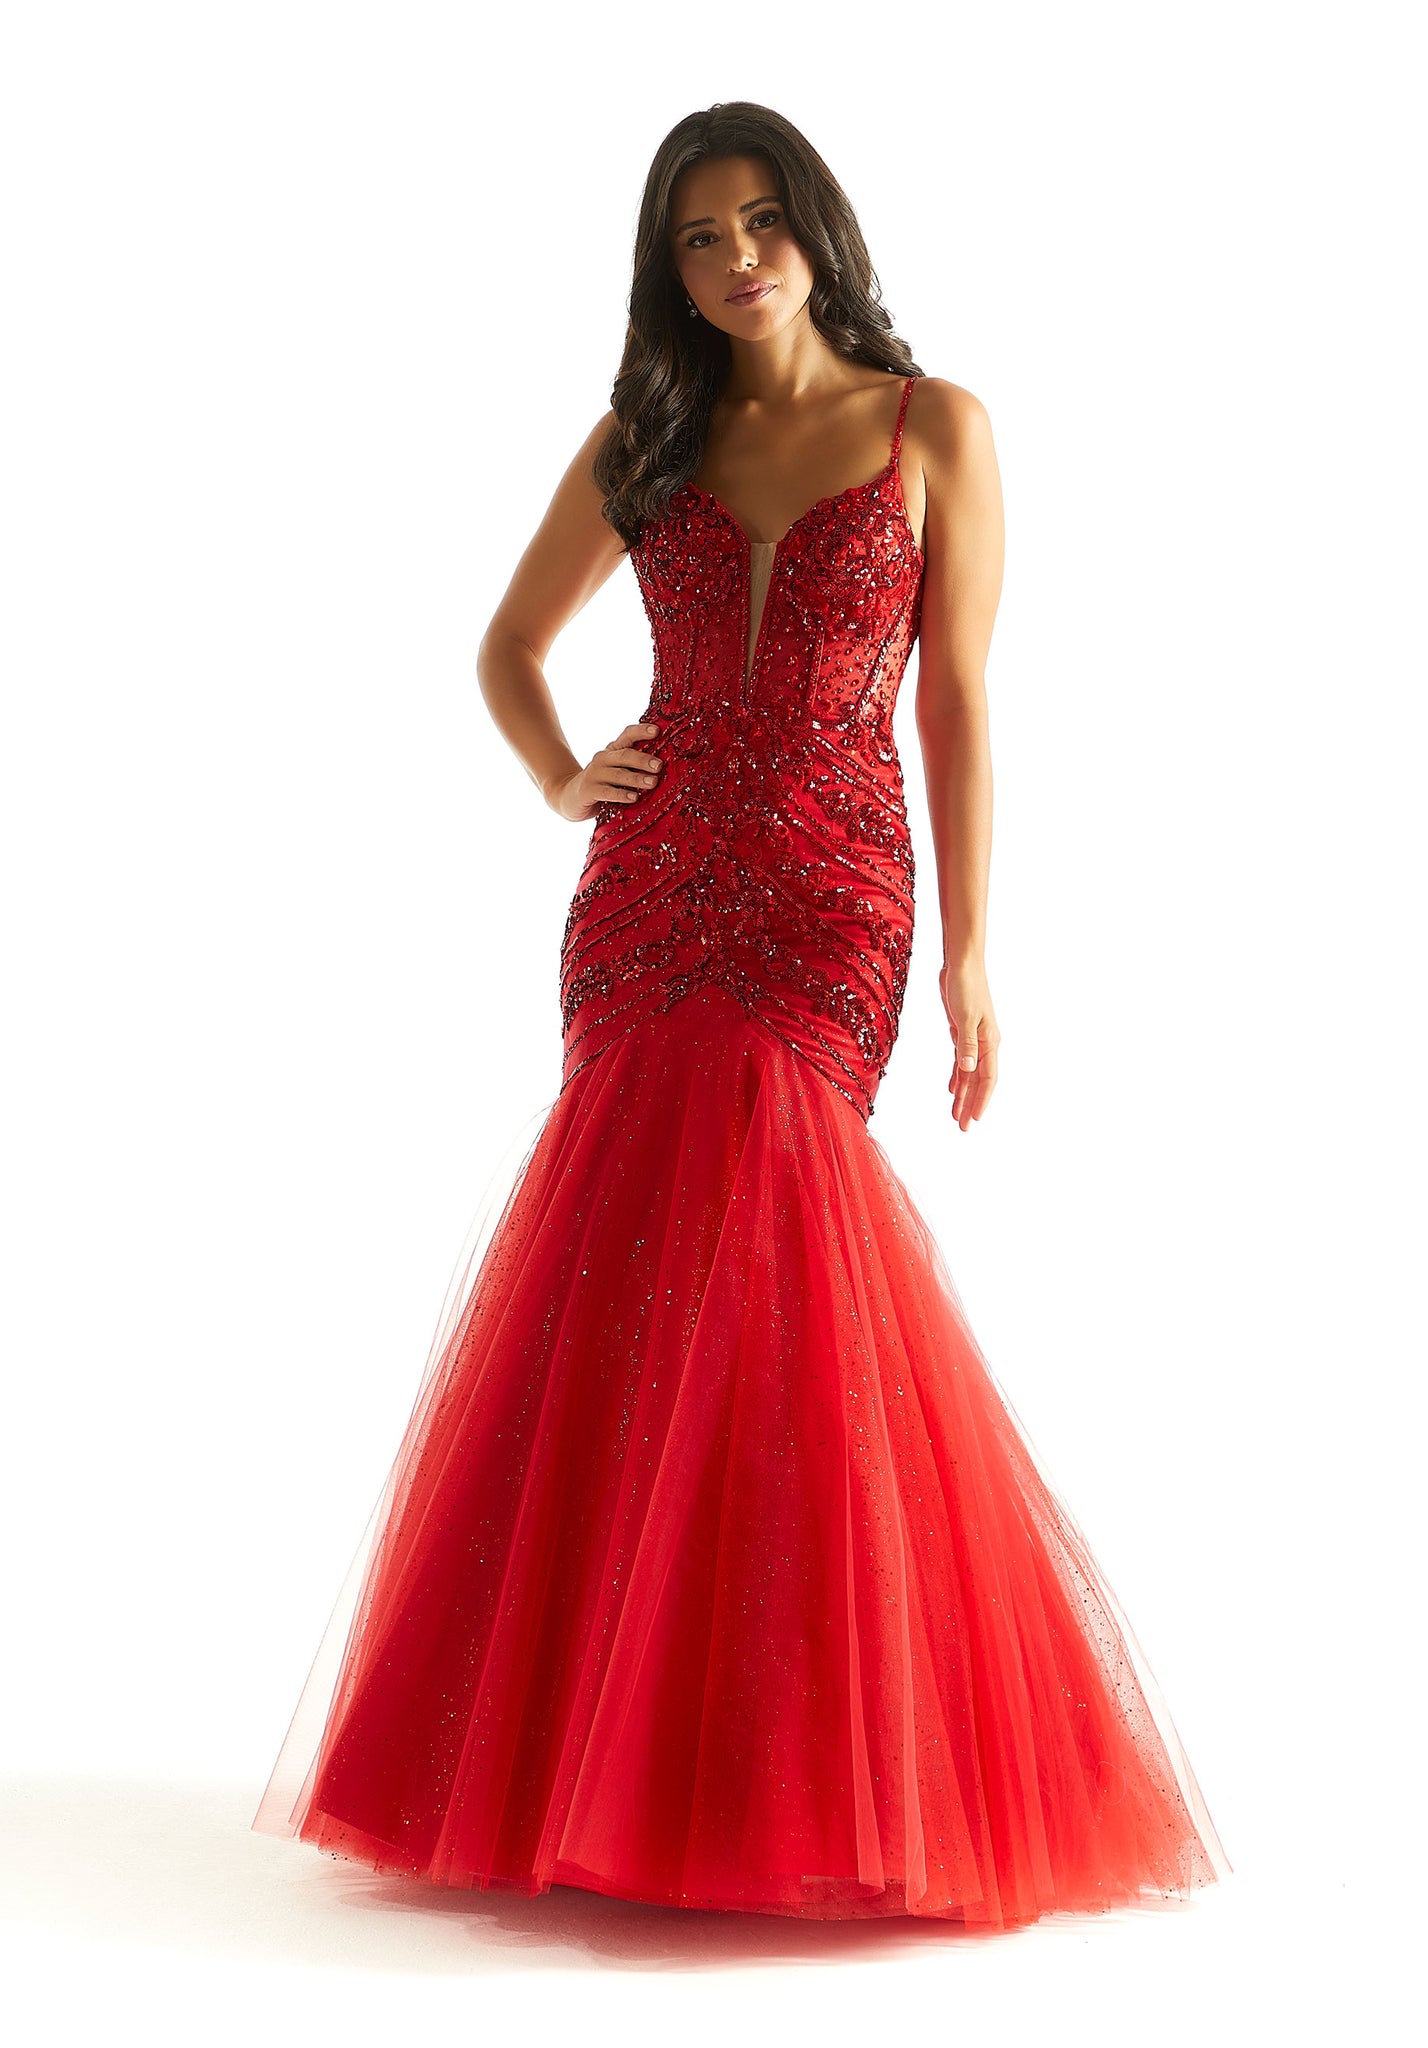 Feel classy and elegant in this magnificent long dress by Morilee, style 49014. Showcasing a mermaid silhouette with plunging v neckline that has mesh for q modest touch. This ensemble is adorned with glistening sequins and dazzling beadwork. The corset bodice is sure to hug your body gorgeously. The tulle skirt has glitter for a touch of sparkle.